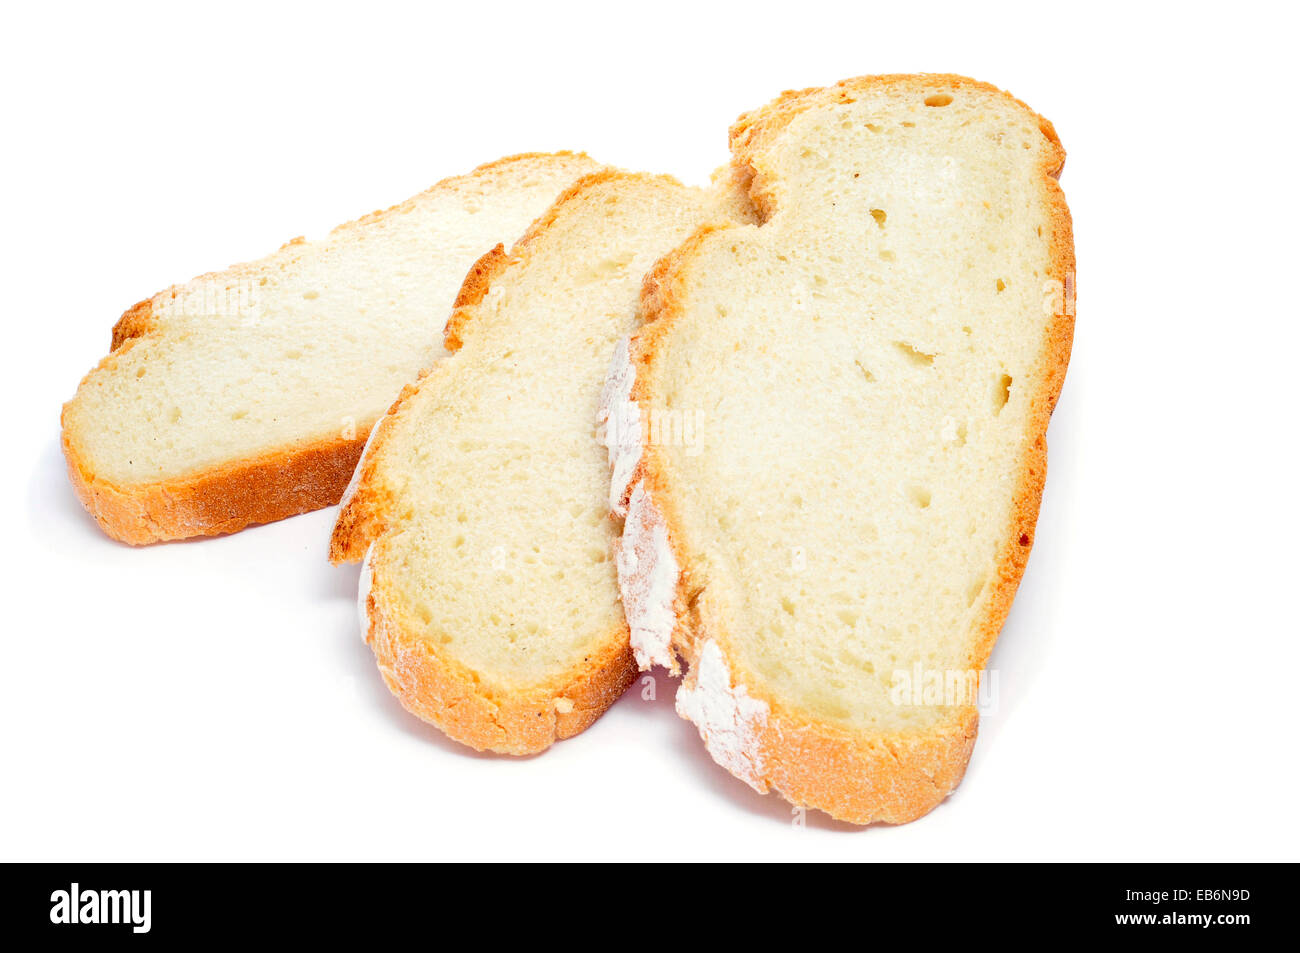 some slices of pan de payes, a round bread typical of Catalonia, Spain, on a white background Stock Photo